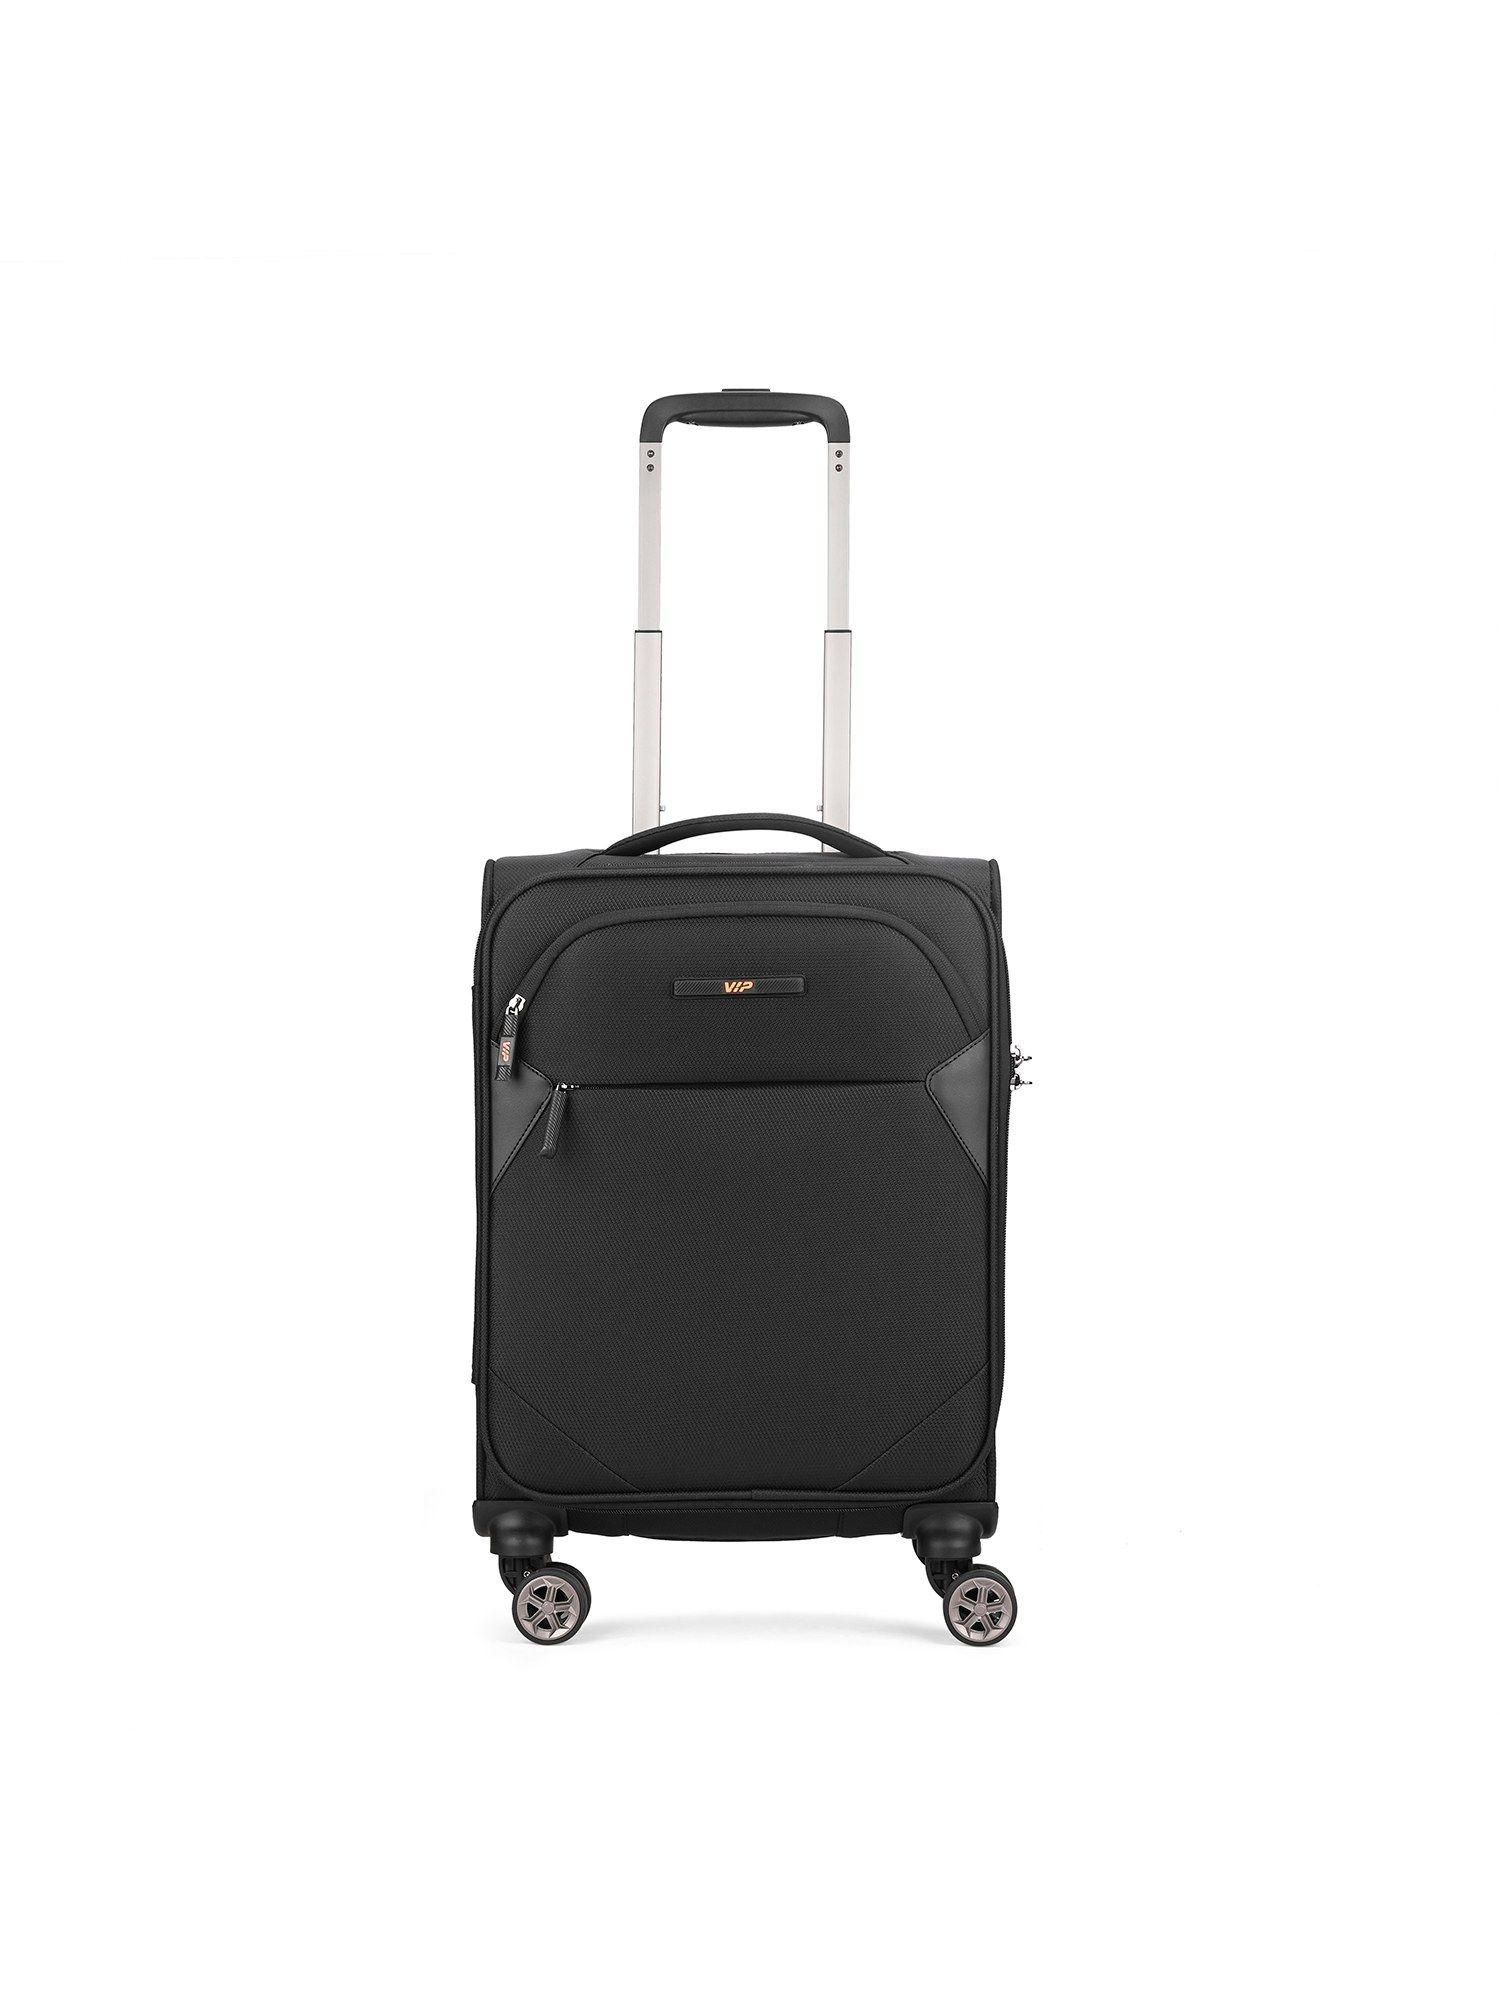 cabin trolley with 8 wheels on suitcase, 360 degree spin black luggage bag